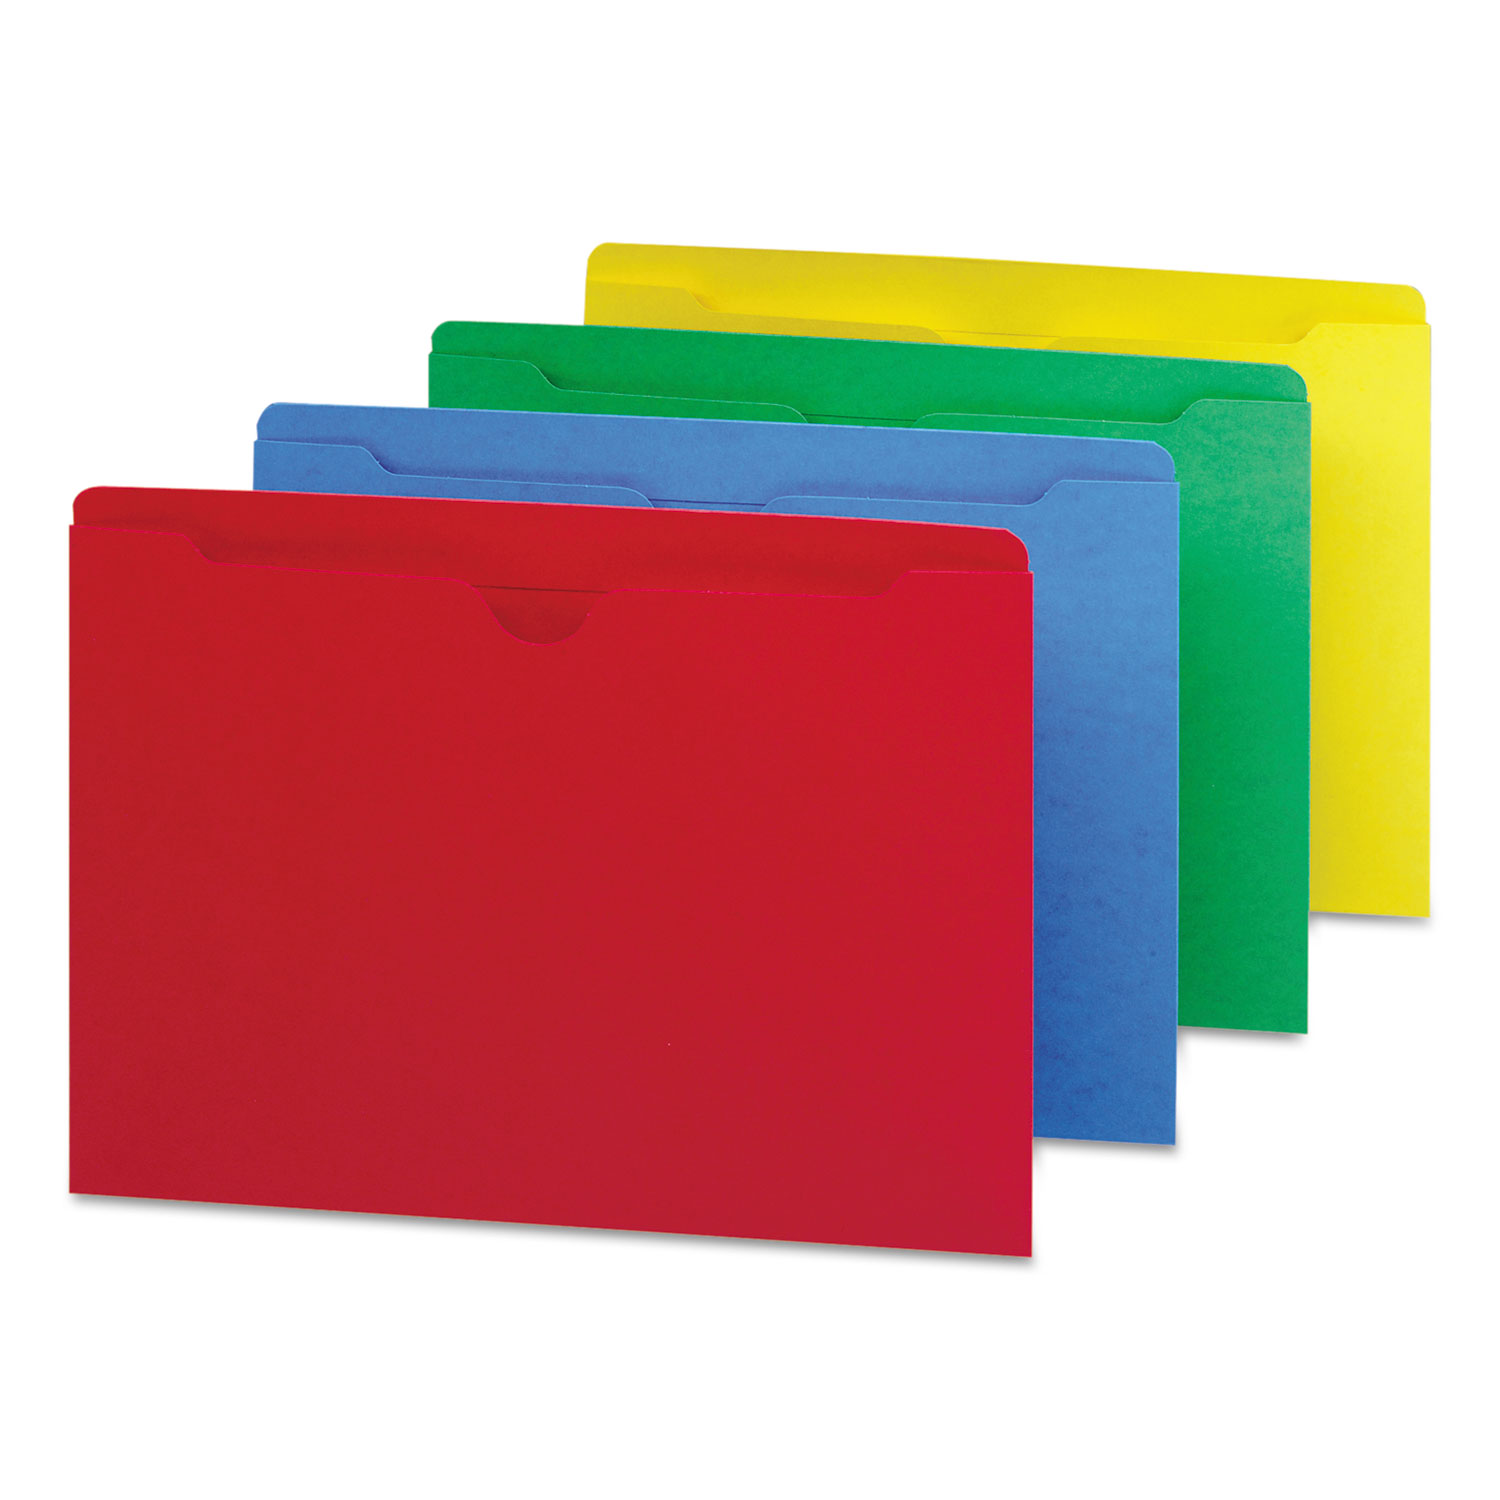  Smead 75613 Colored File Jackets with Reinforced Double-Ply Tab, Straight Tab, Letter Size, Assorted Colors, 100/Box (SMD75613) 